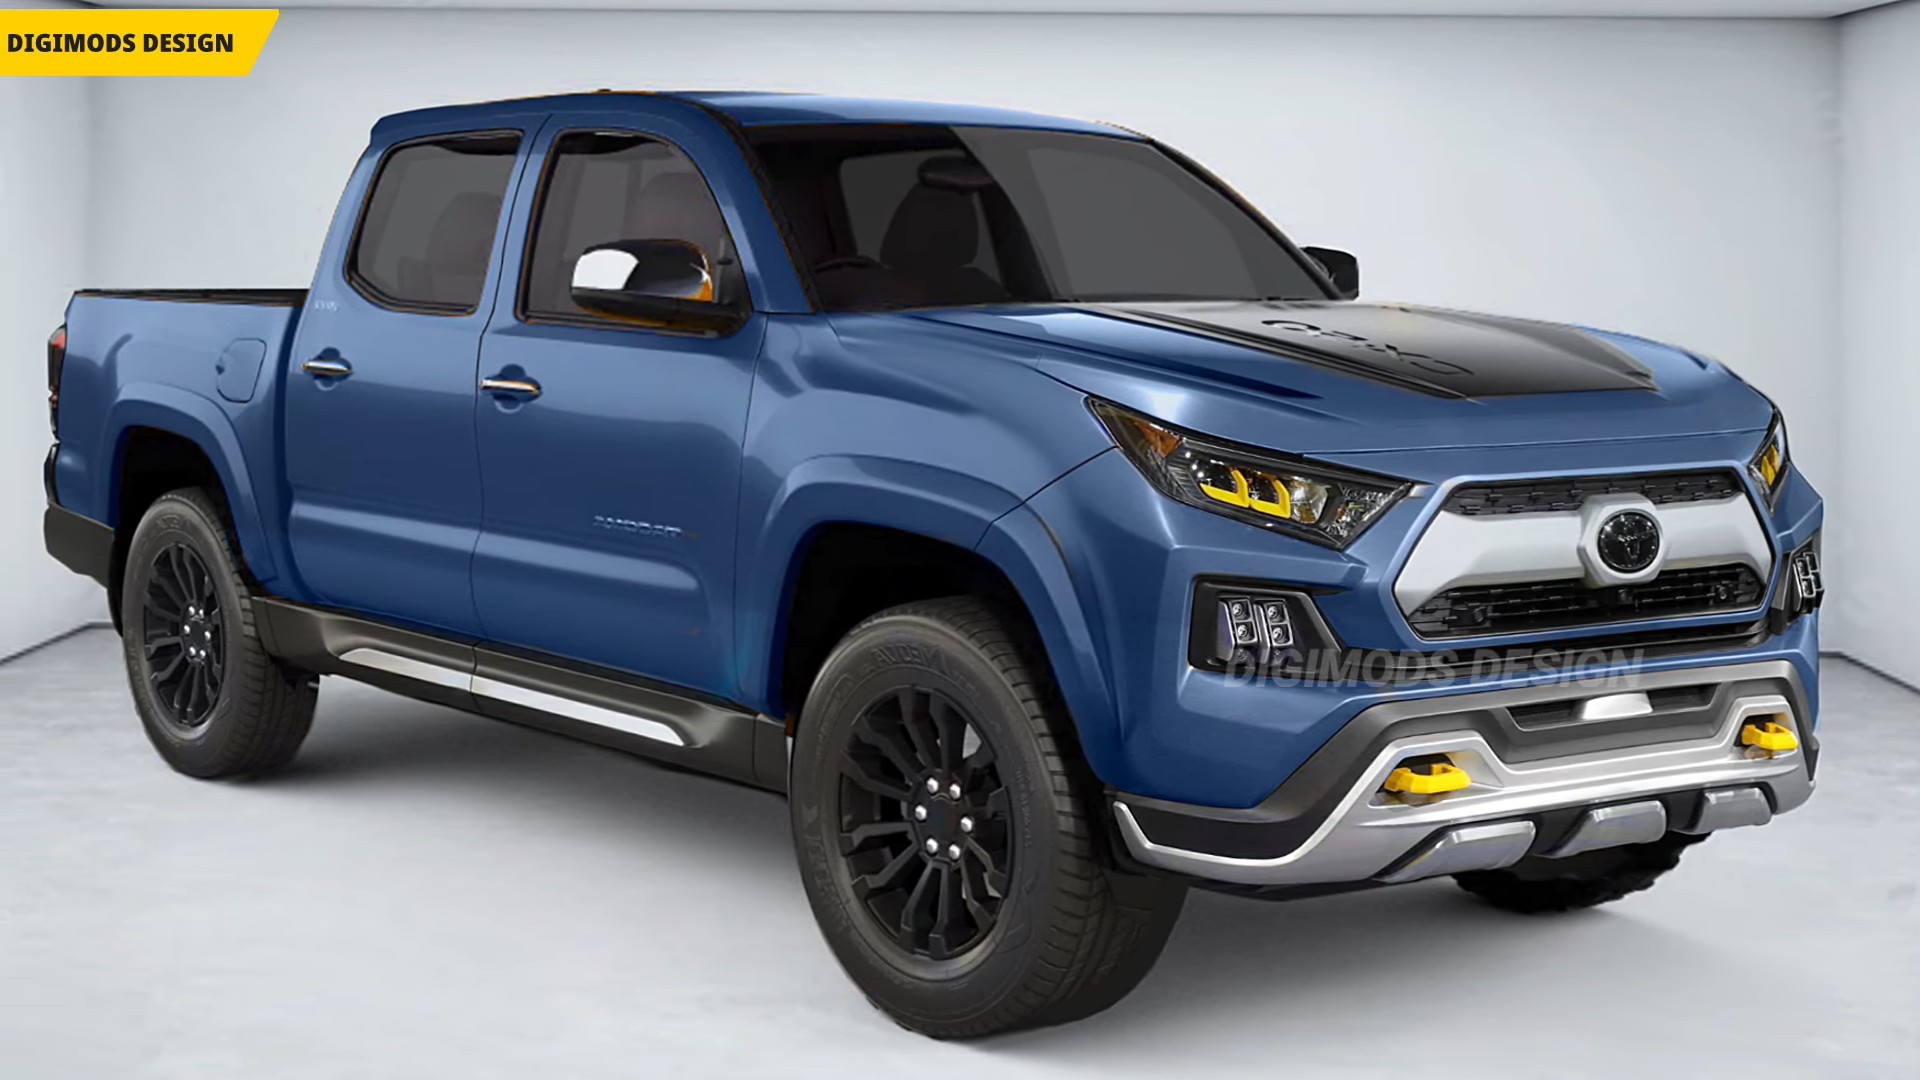 This NextGen 2025 Toyota Rendering Is Both Rugged and